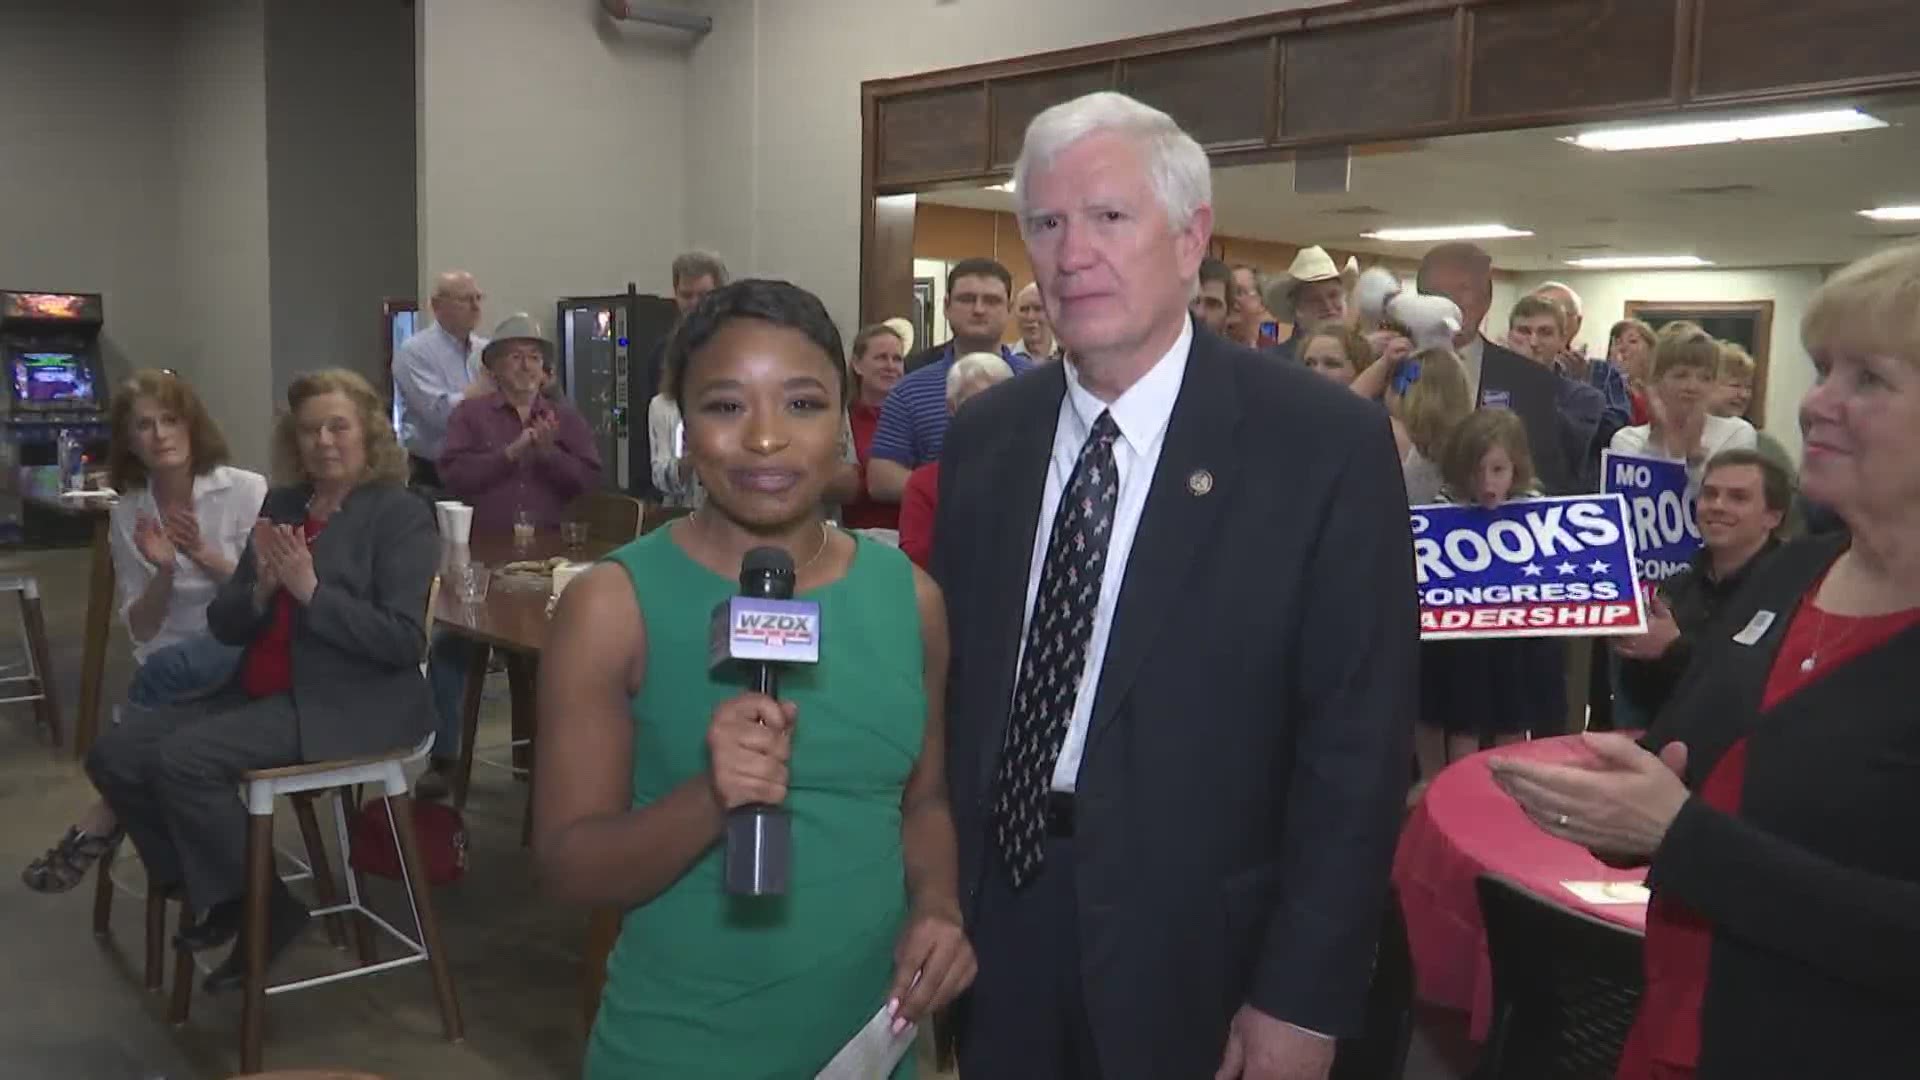 WZDX was live with projected U.S. Representative winner Mo Brooks.